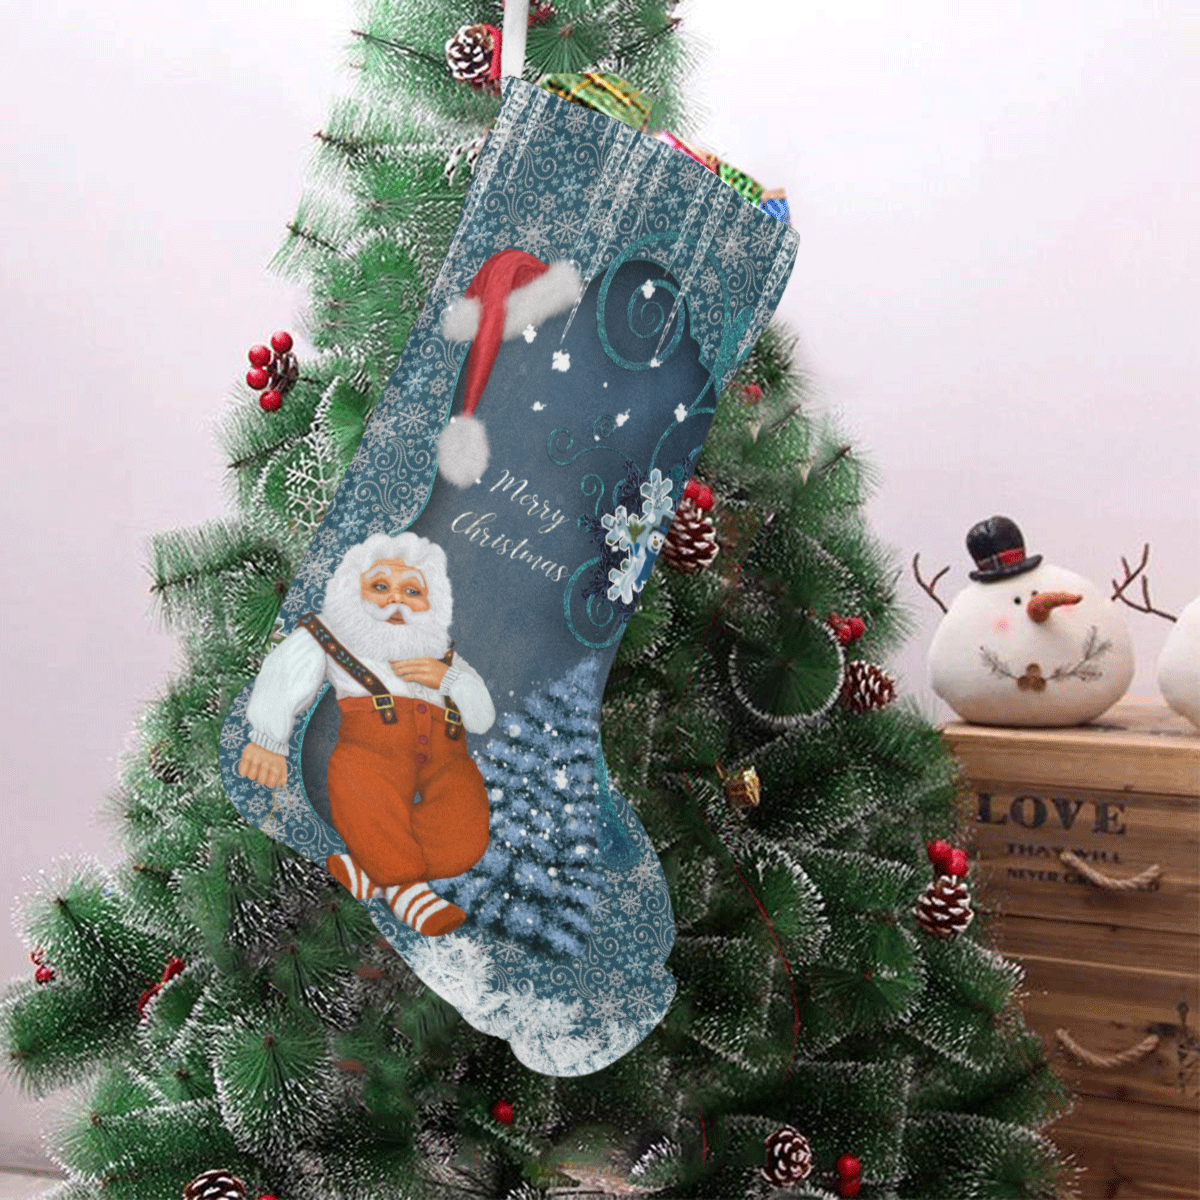 Funny Santa Claus Christmas Stocking (Without Folded Top)